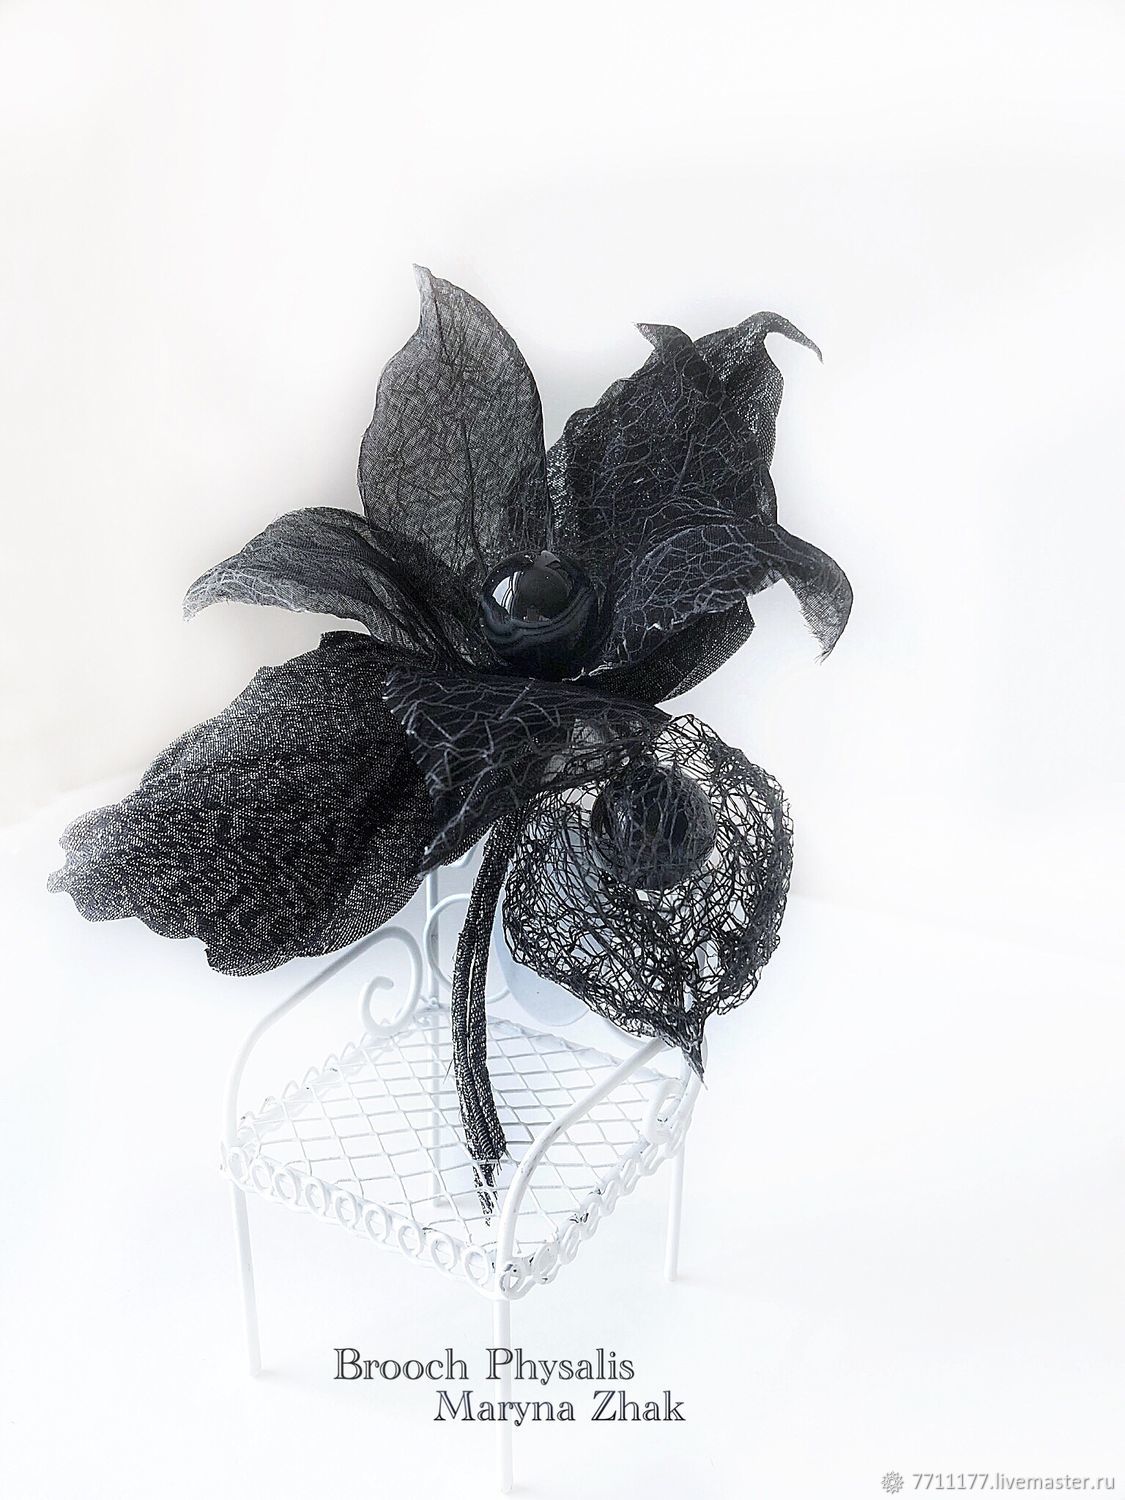 Brooch-pin: Evening decoration with physalis in black , Brooches, Kharkiv,  Фото №1